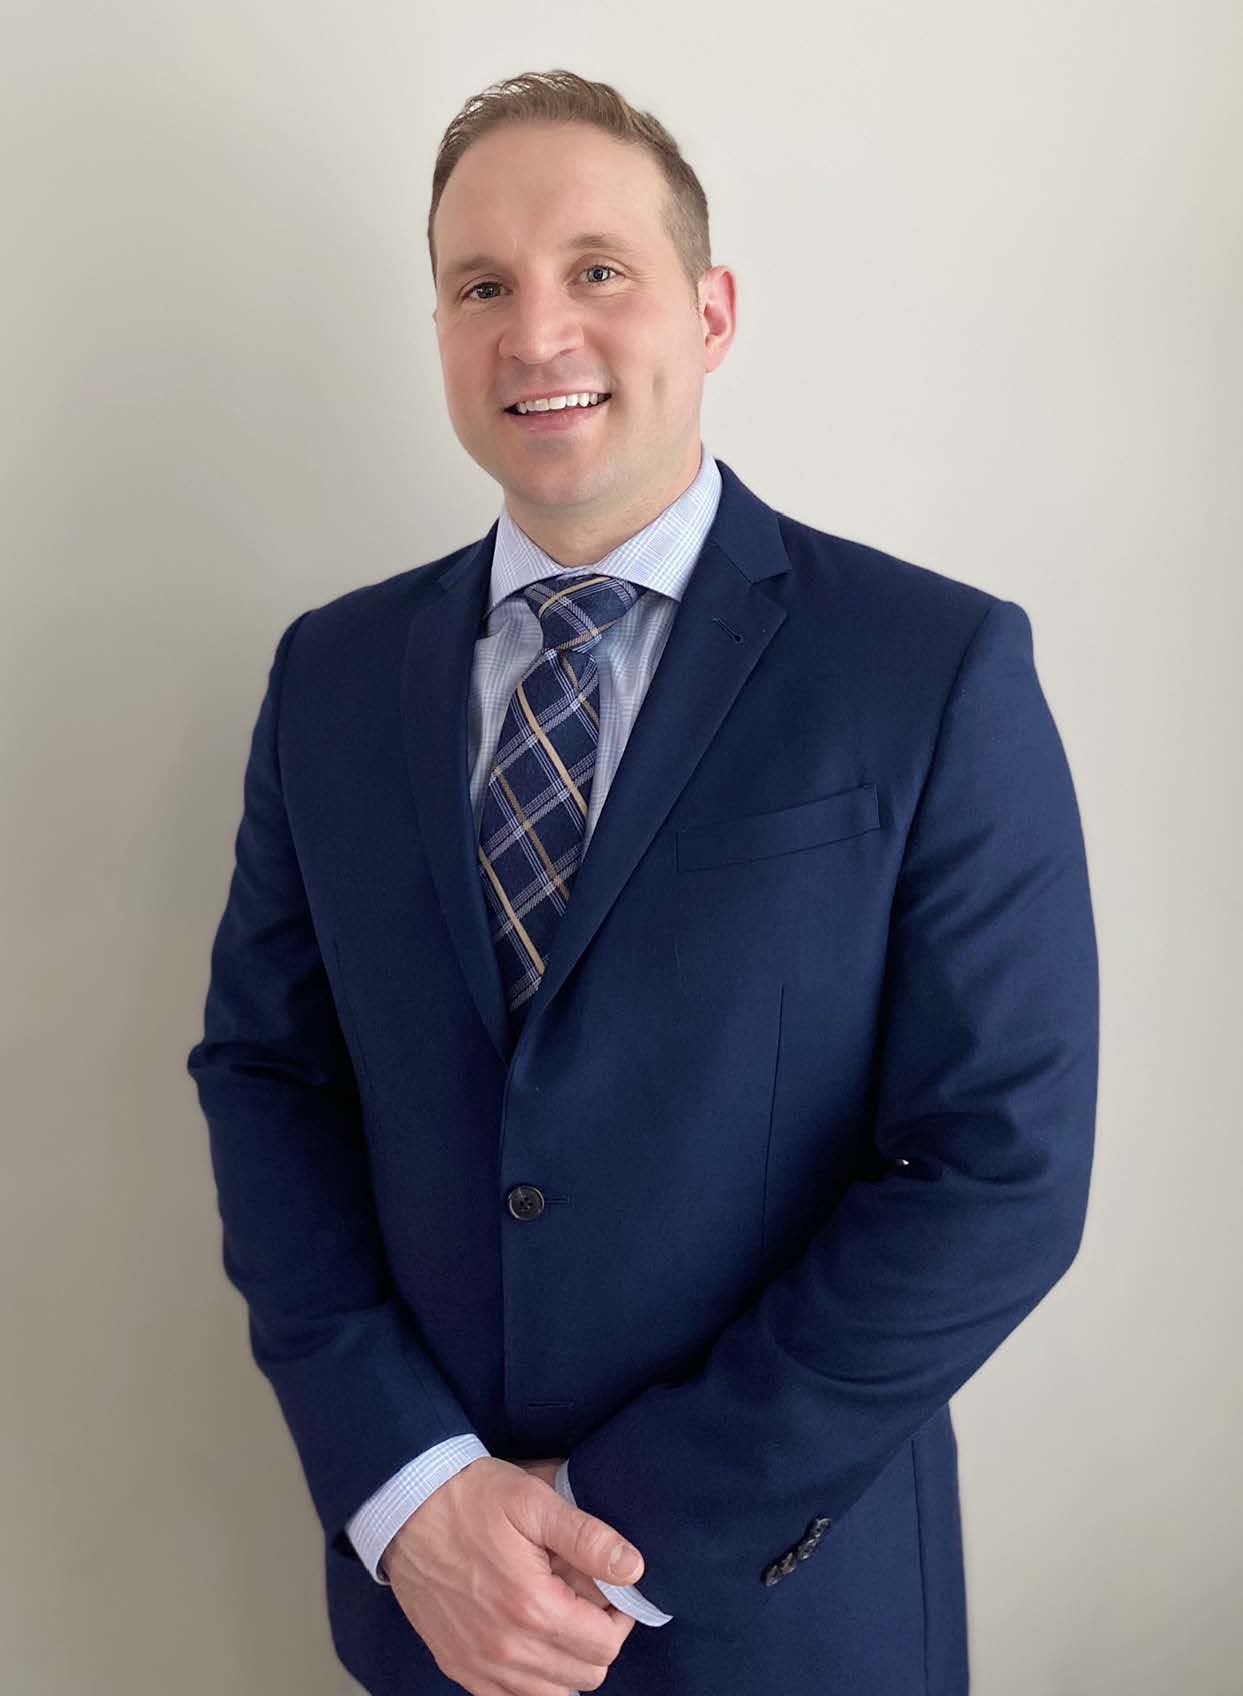 Orthopedic Surgeon and Total Joints Specialist, Mark Kolich, DO, to Join OrthoNeuro in August 2021